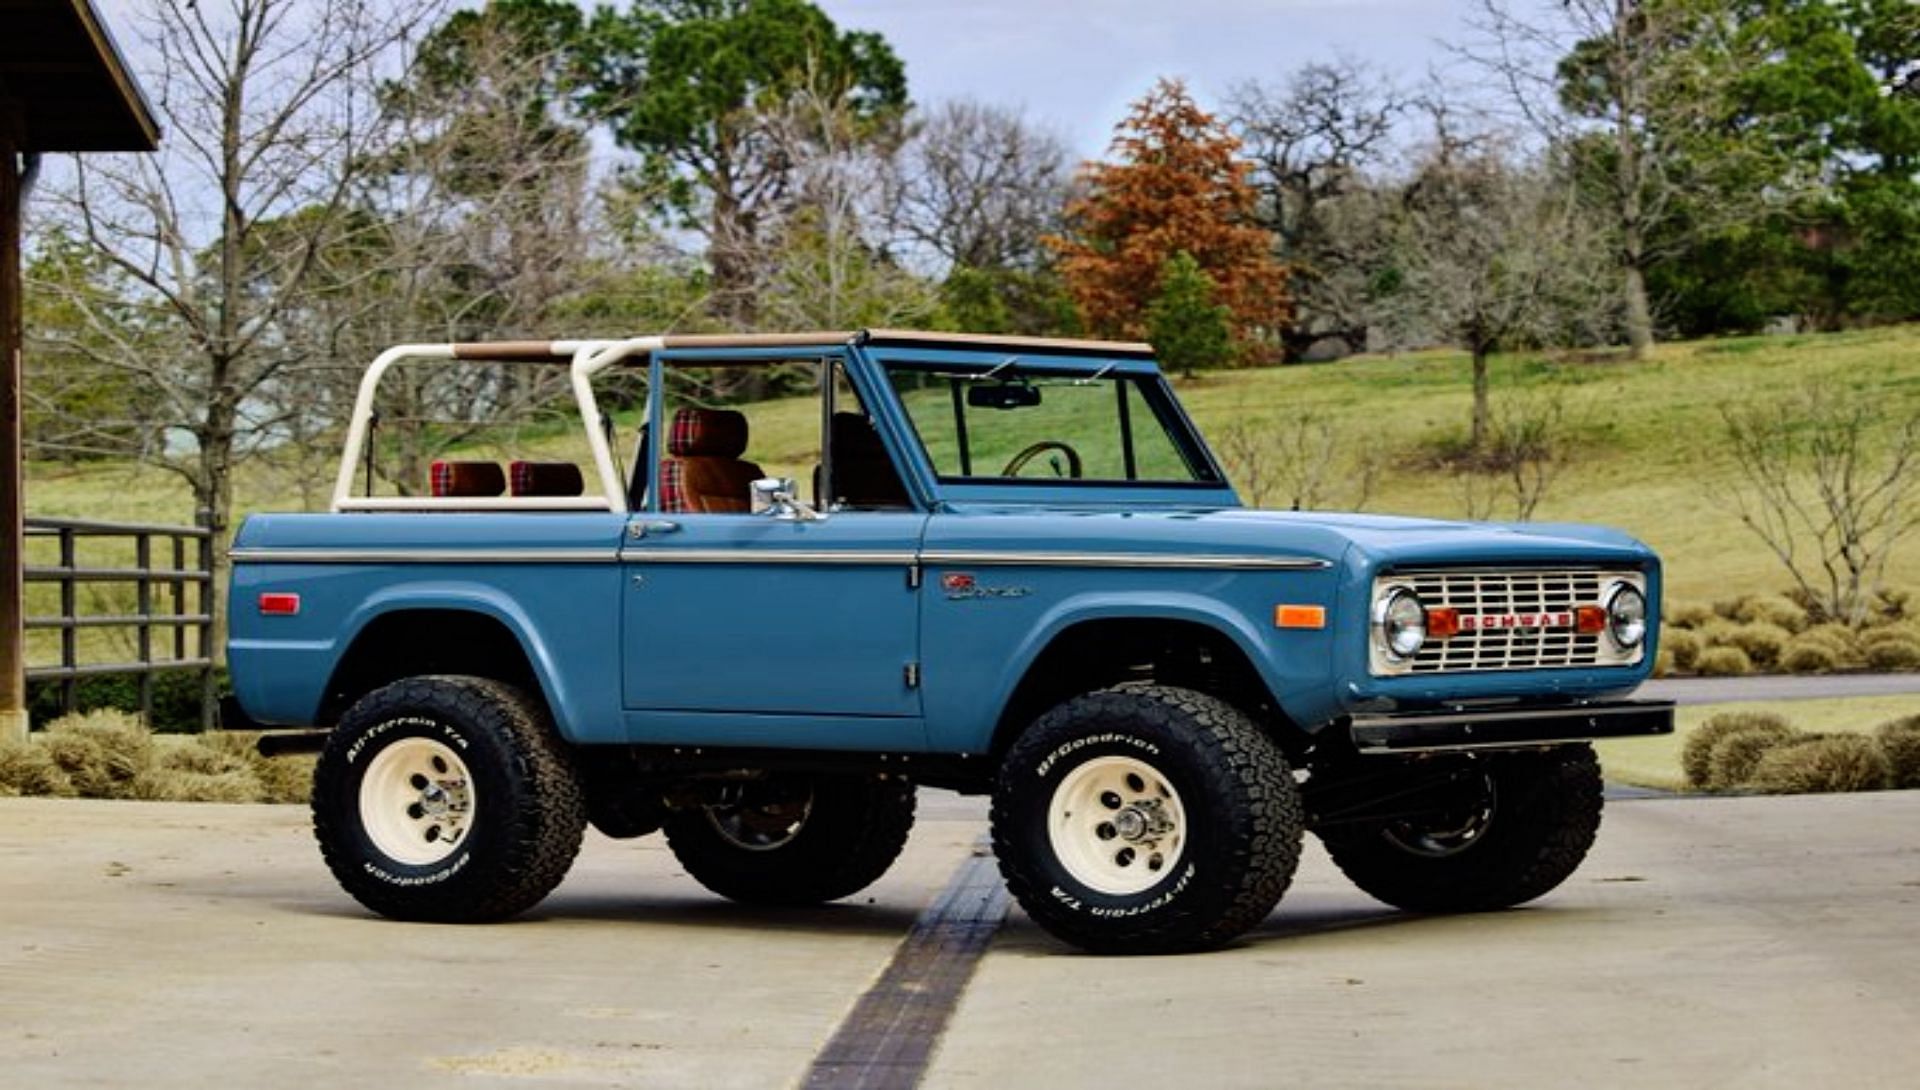 1973 Ford Bronco that will be presented to the 2023 Charles Schwab Challenge winner (Image via Twitter @SecretGolf).